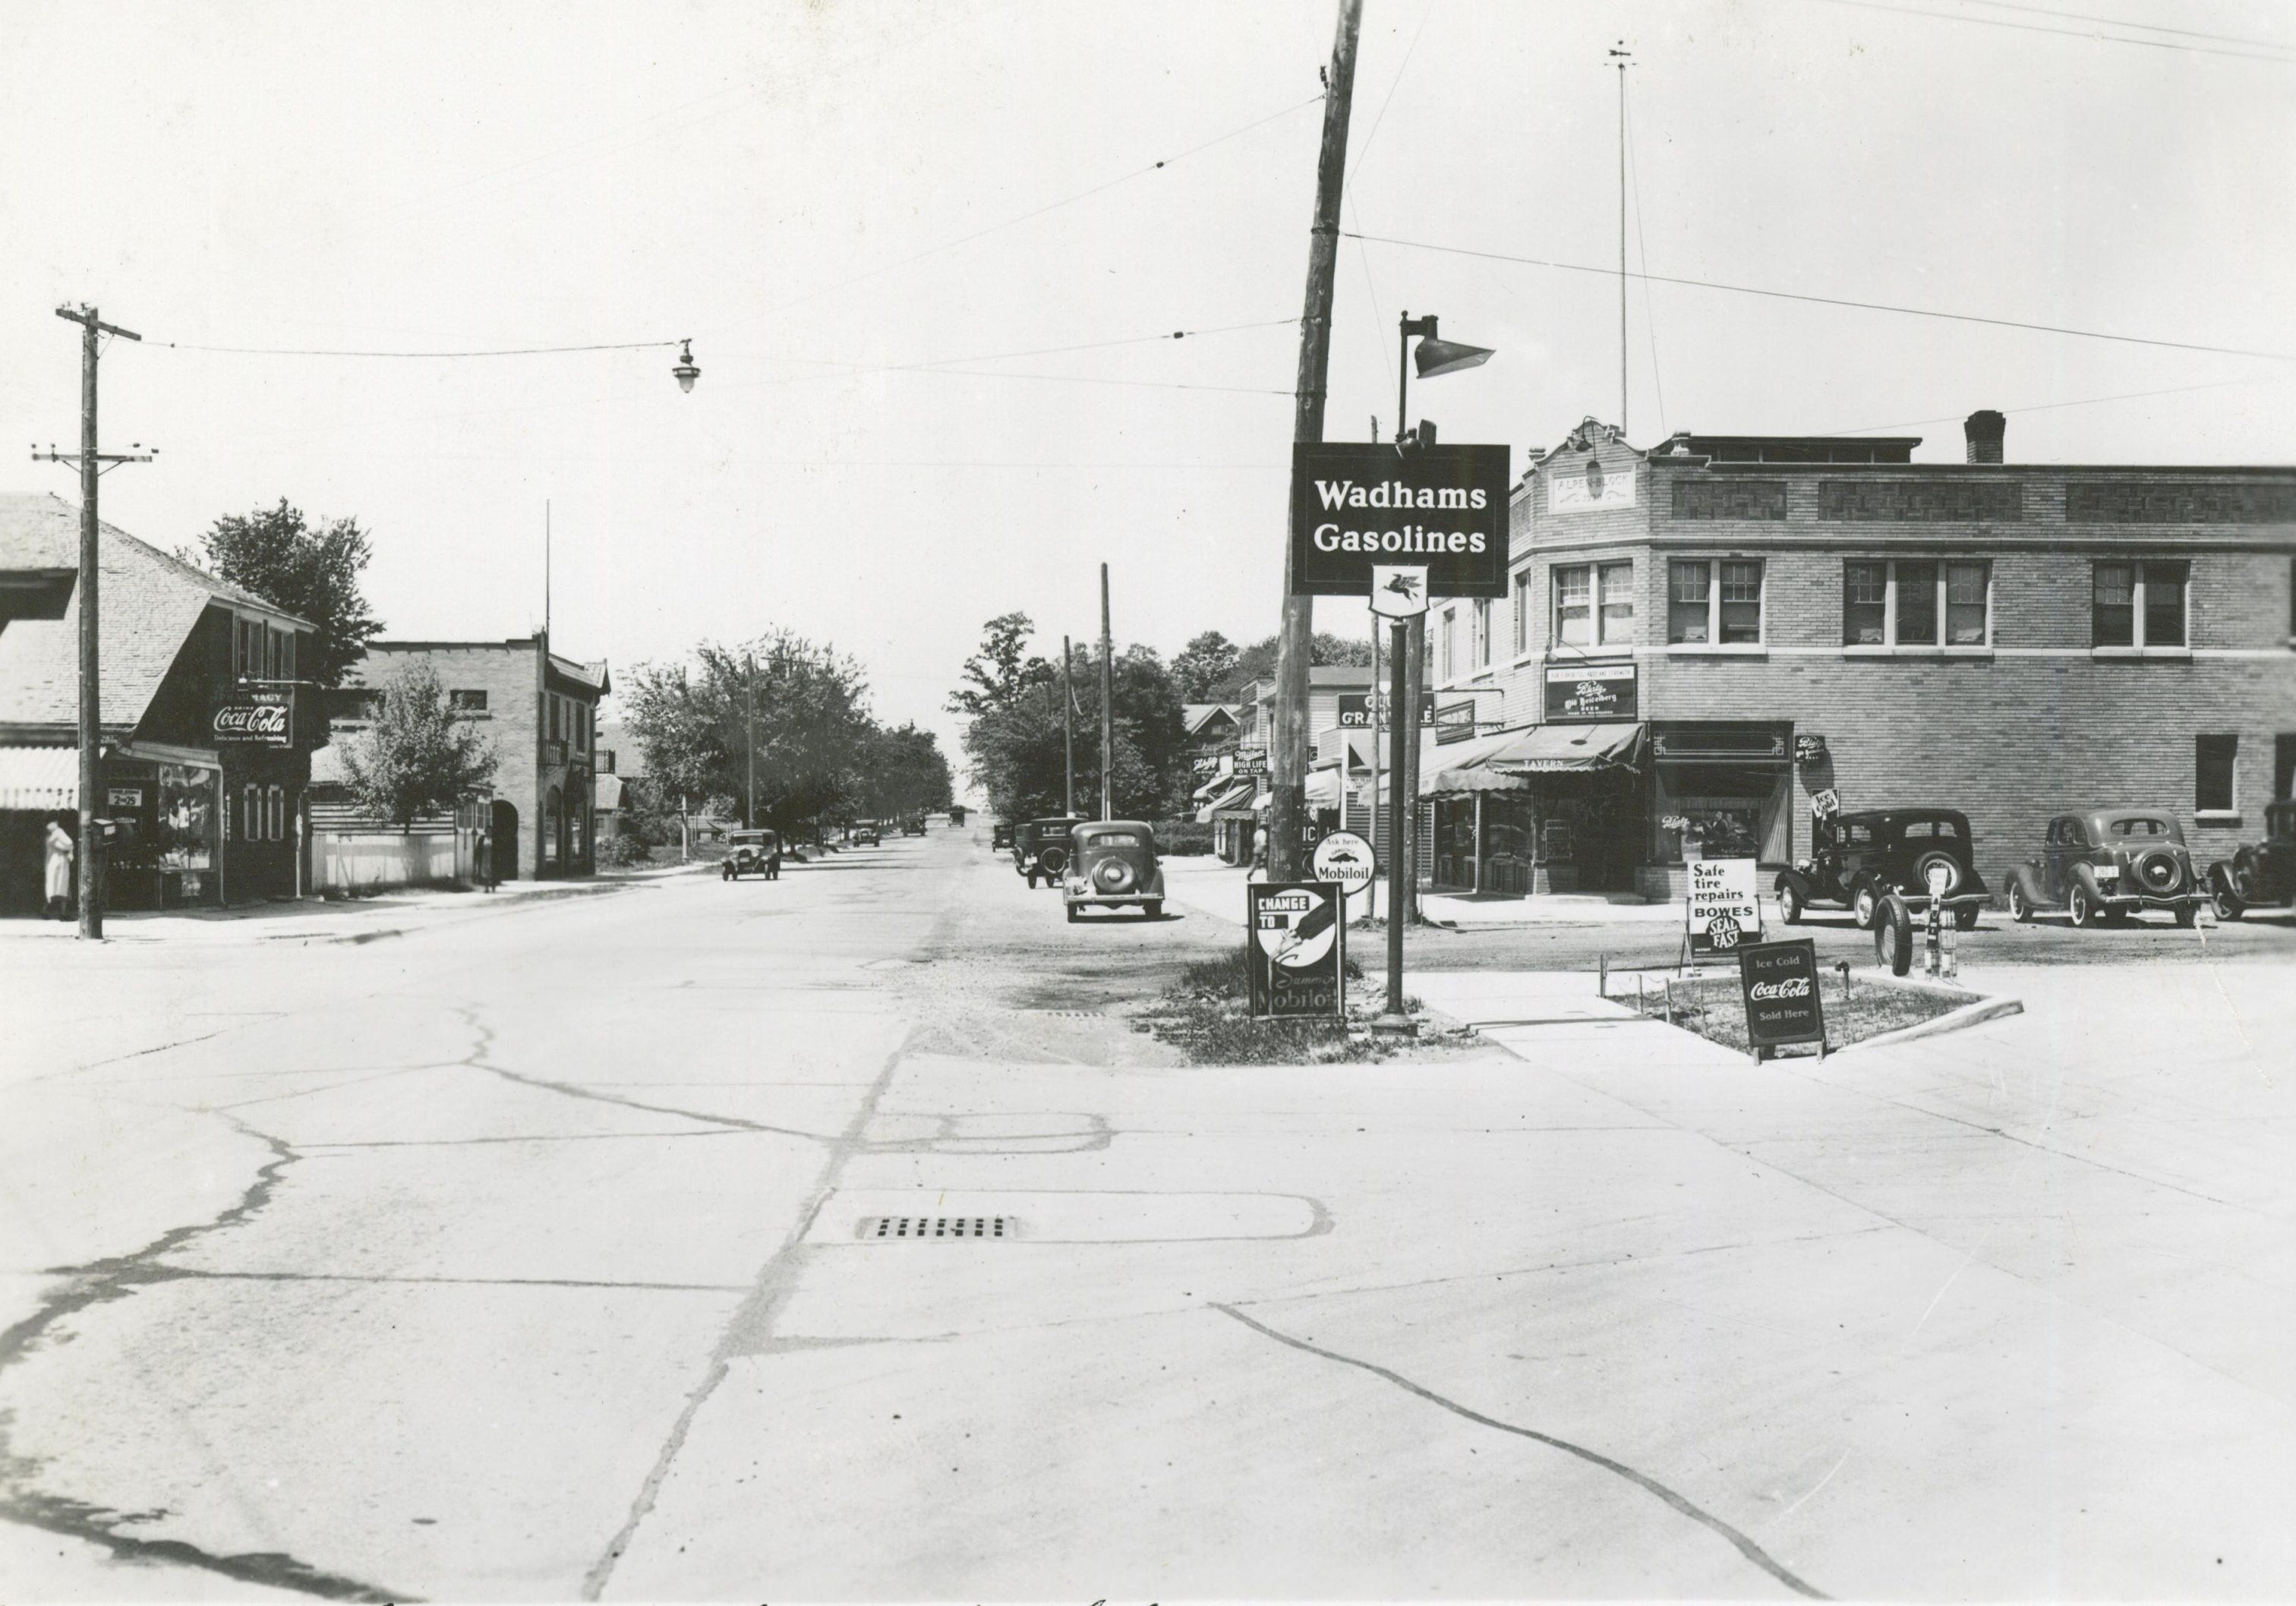 The intersection of N. 35th Street and Silver Spring Avenue, as it appeared in 1940.